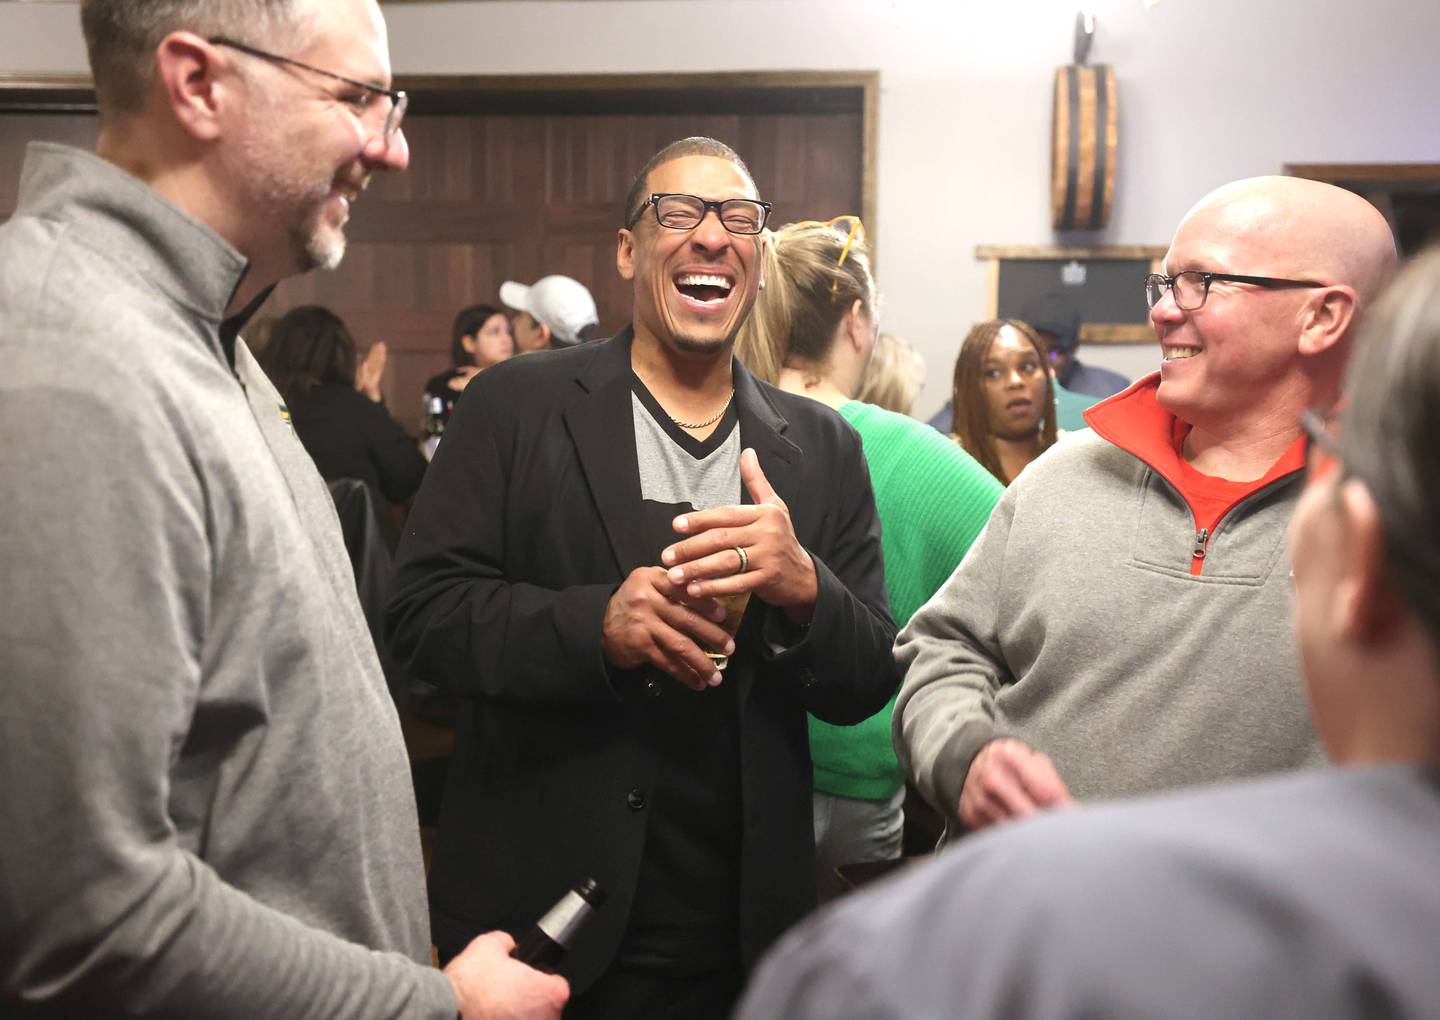 John Walker, (middle) DeKalb 7th Ward aldermanic candidate, has a laugh with supporters Tuesday, April 4, 2023, during an election night watch party at Fatty's Pub & Grill in DeKalb.